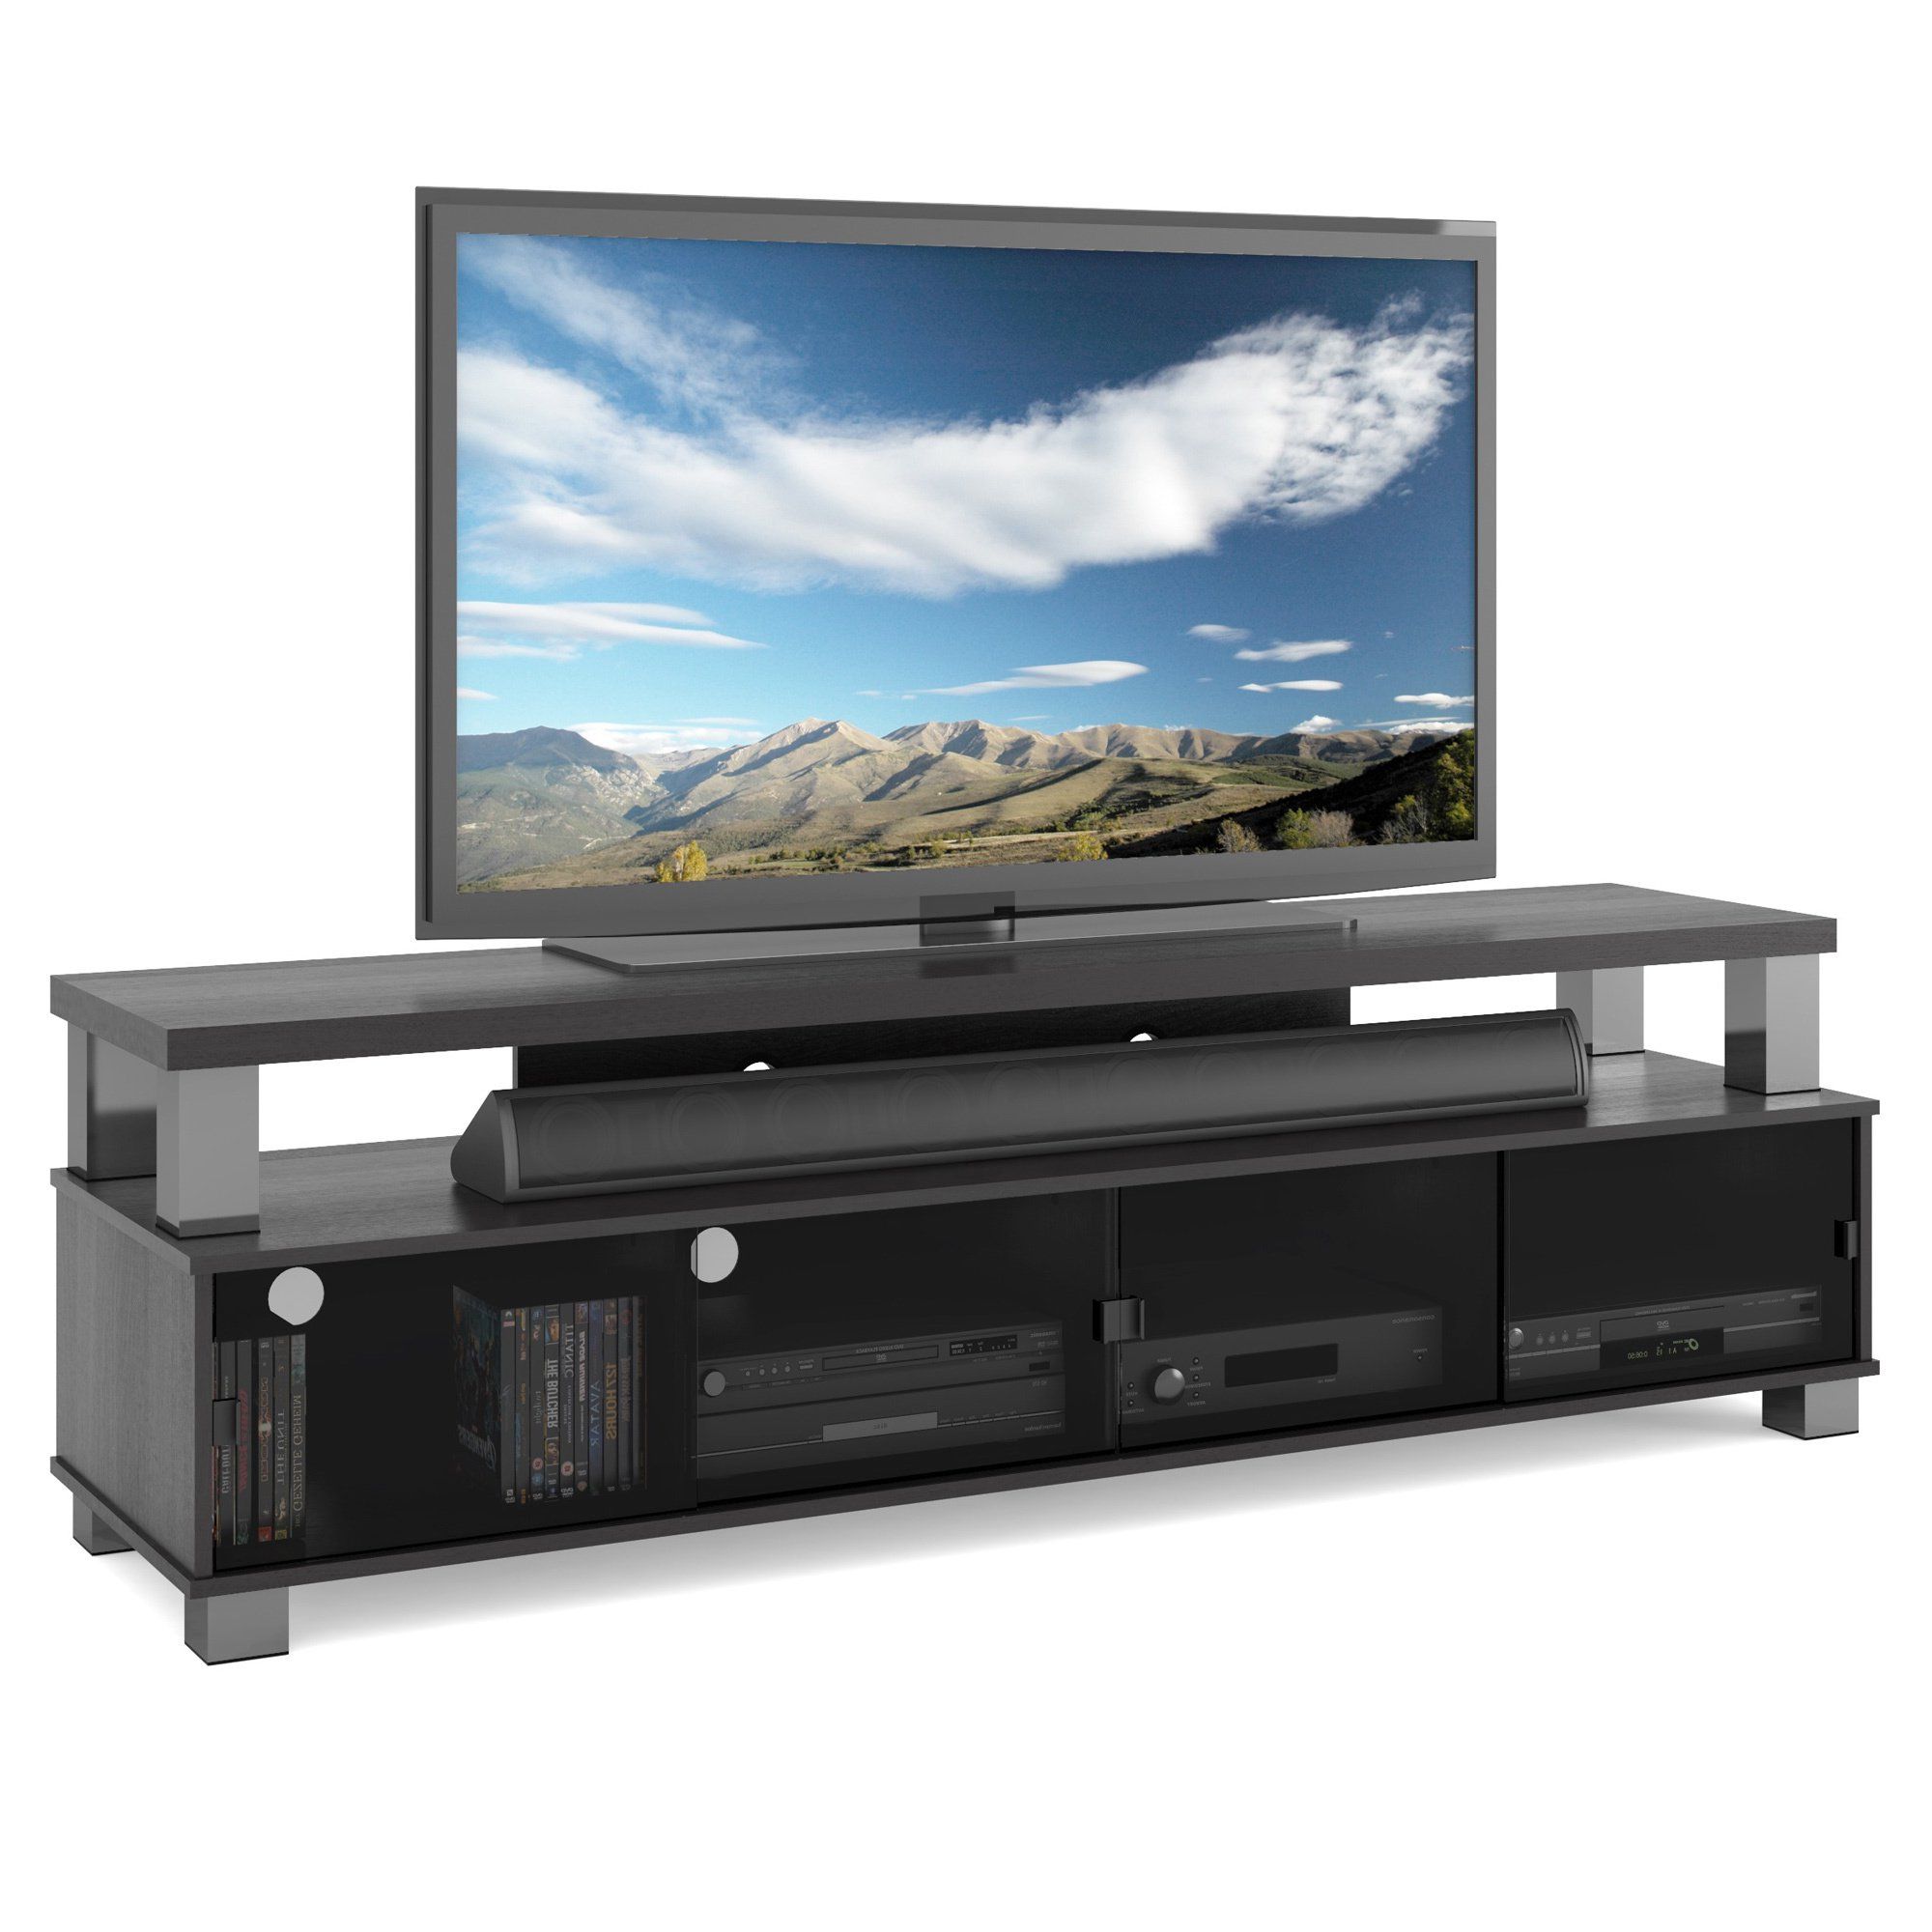 Widely Used Shop Two Tier Tv Bench In Ravenwood Black, For Tvs Up To 80" – Free With Regard To Oxford 84 Inch Tv Stands (Photo 10 of 20)